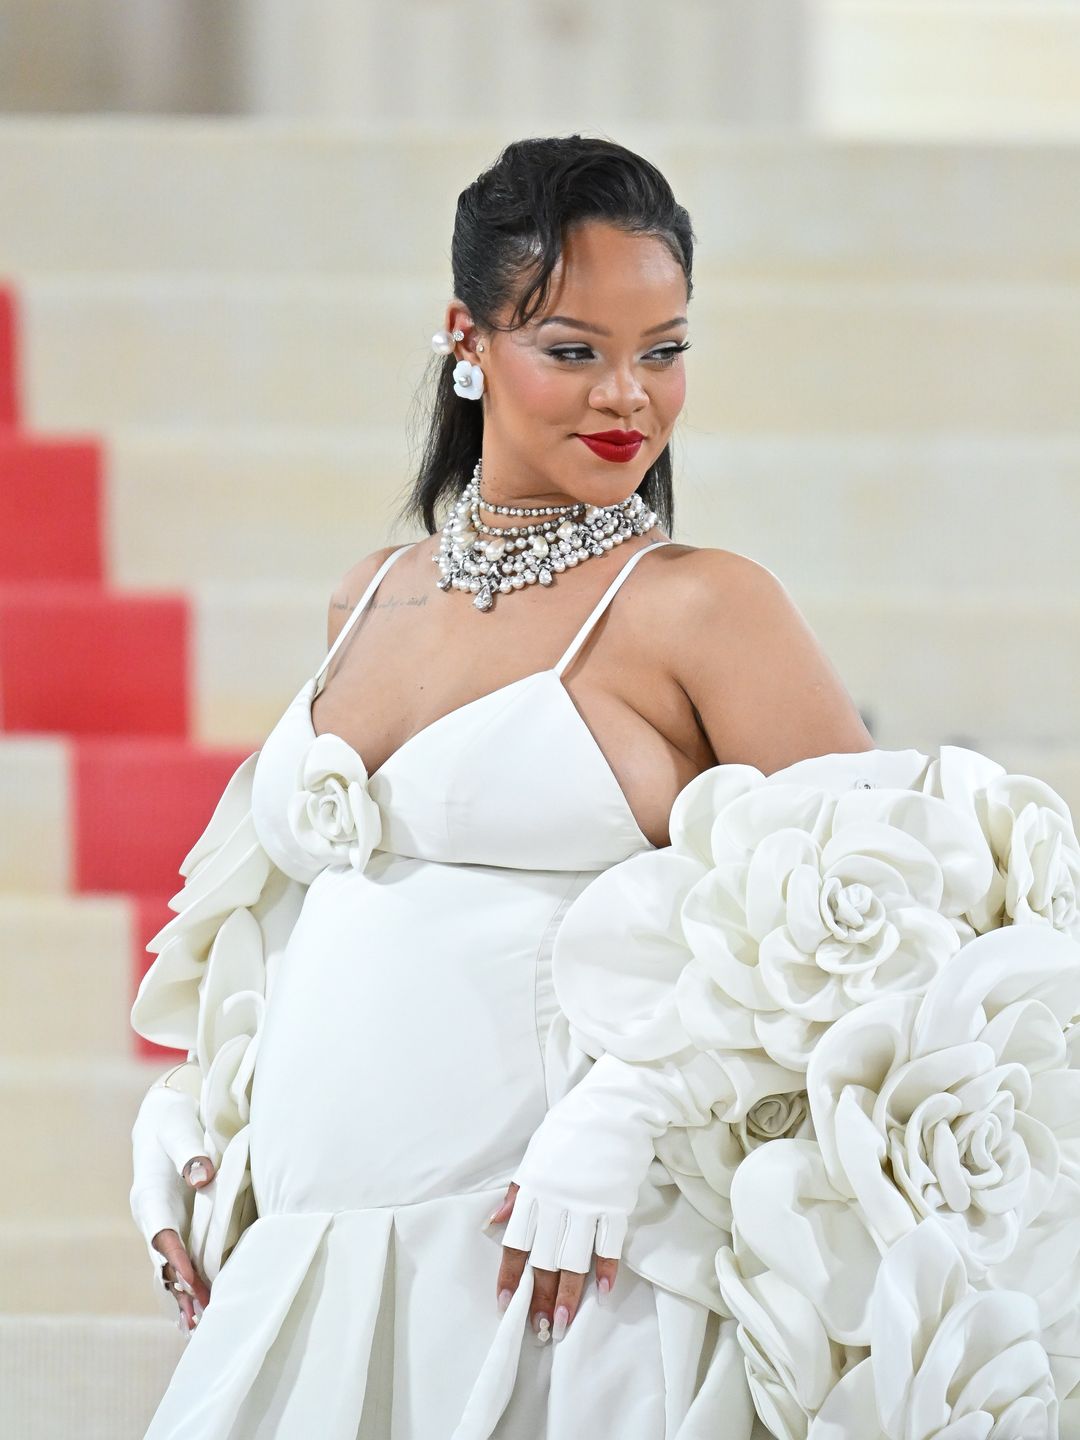 Rhianna attends the Met Gala 2023 wearing a white gown and a platinum necklace from Bulgari